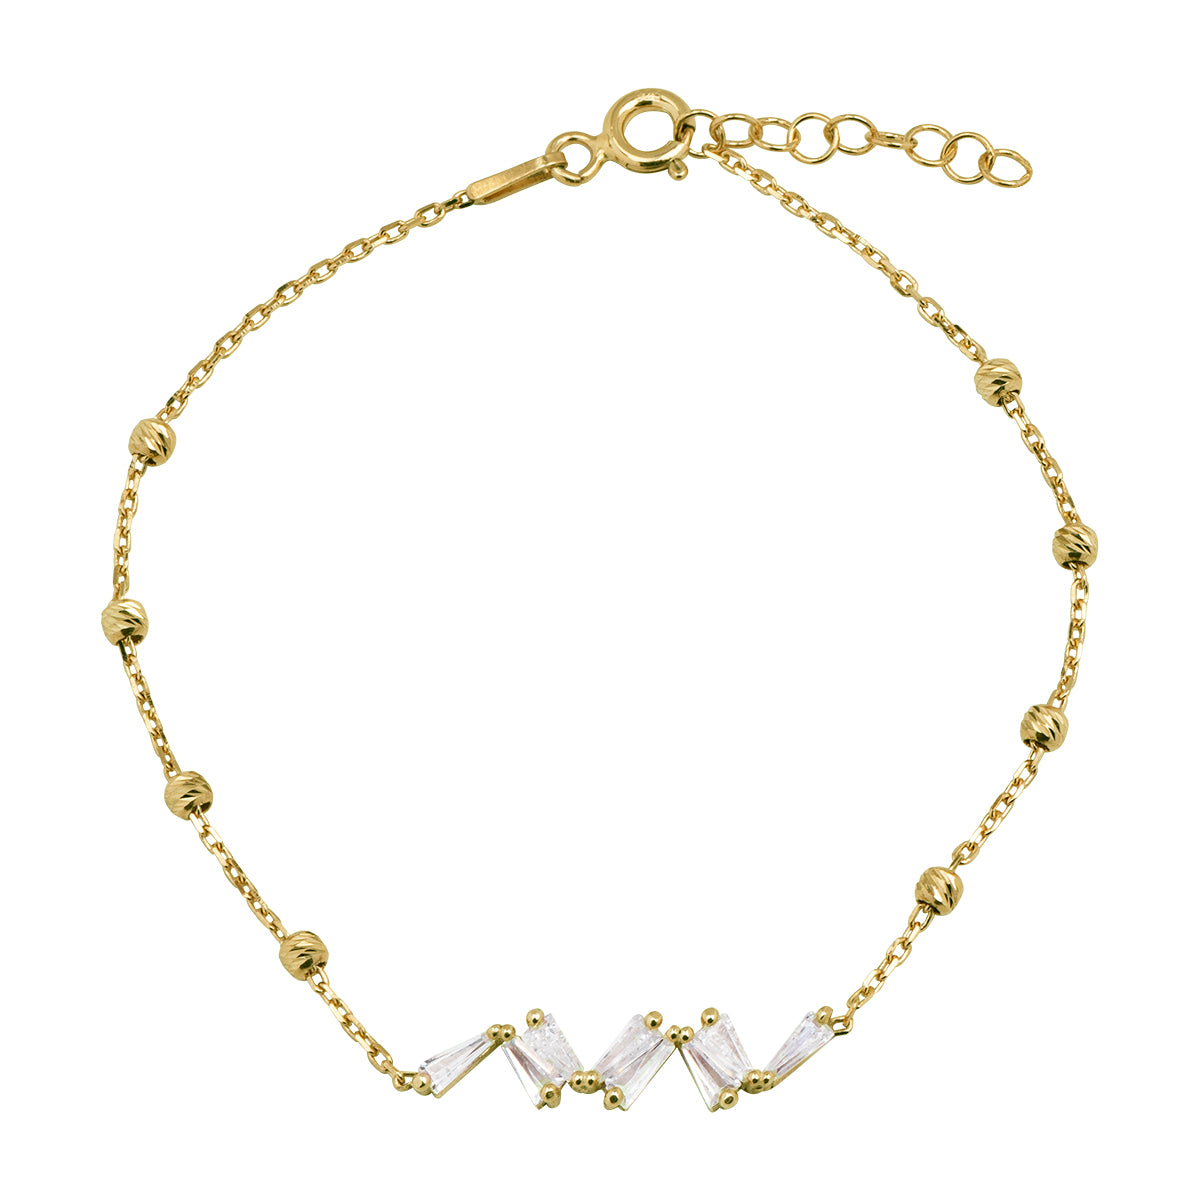 925 Sterling silver, gold plated bracelet with dorica beads and white zirconia stones.